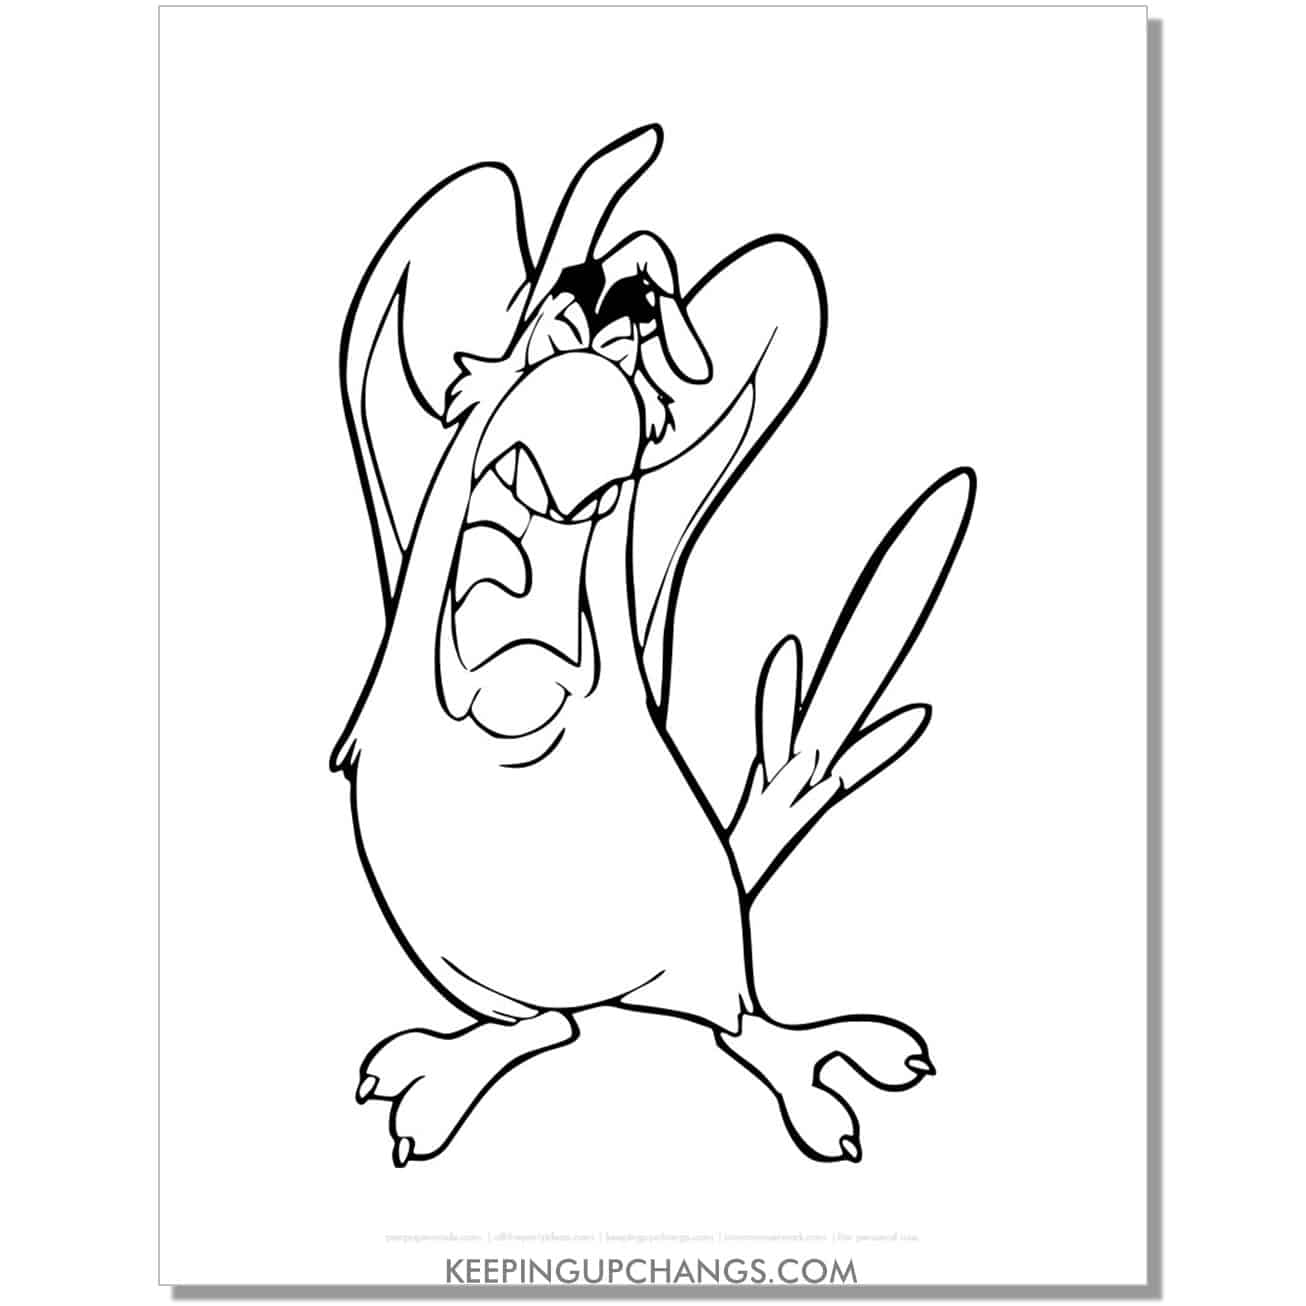 aladdin iago covering ears coloring page, sheet.